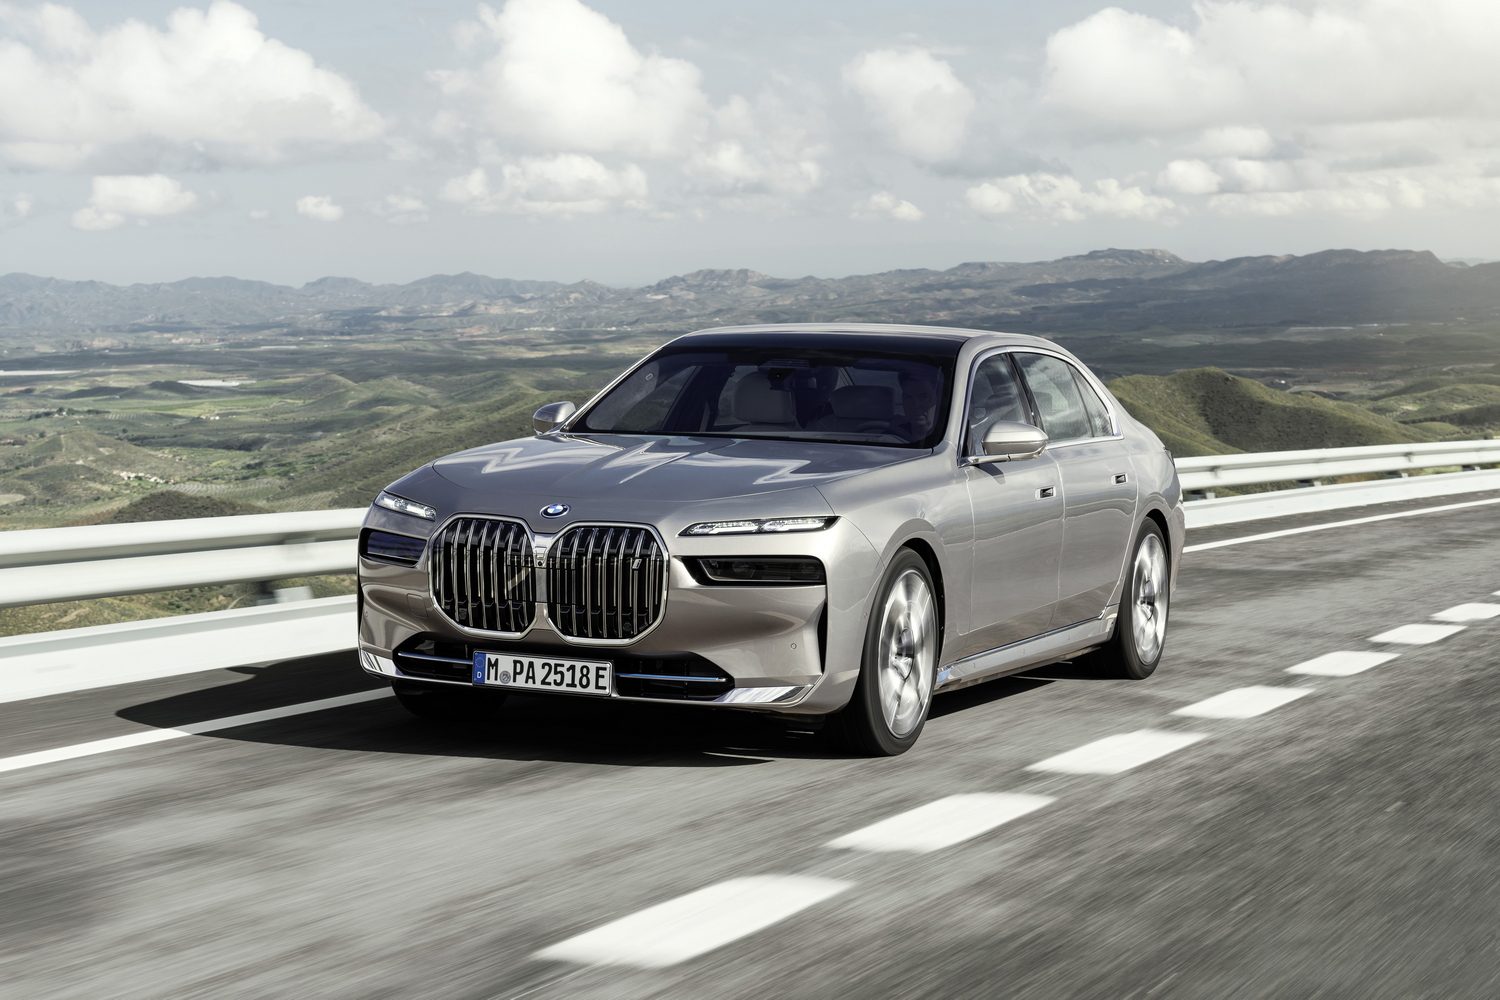 New all-electric BMW 7 Series revealed